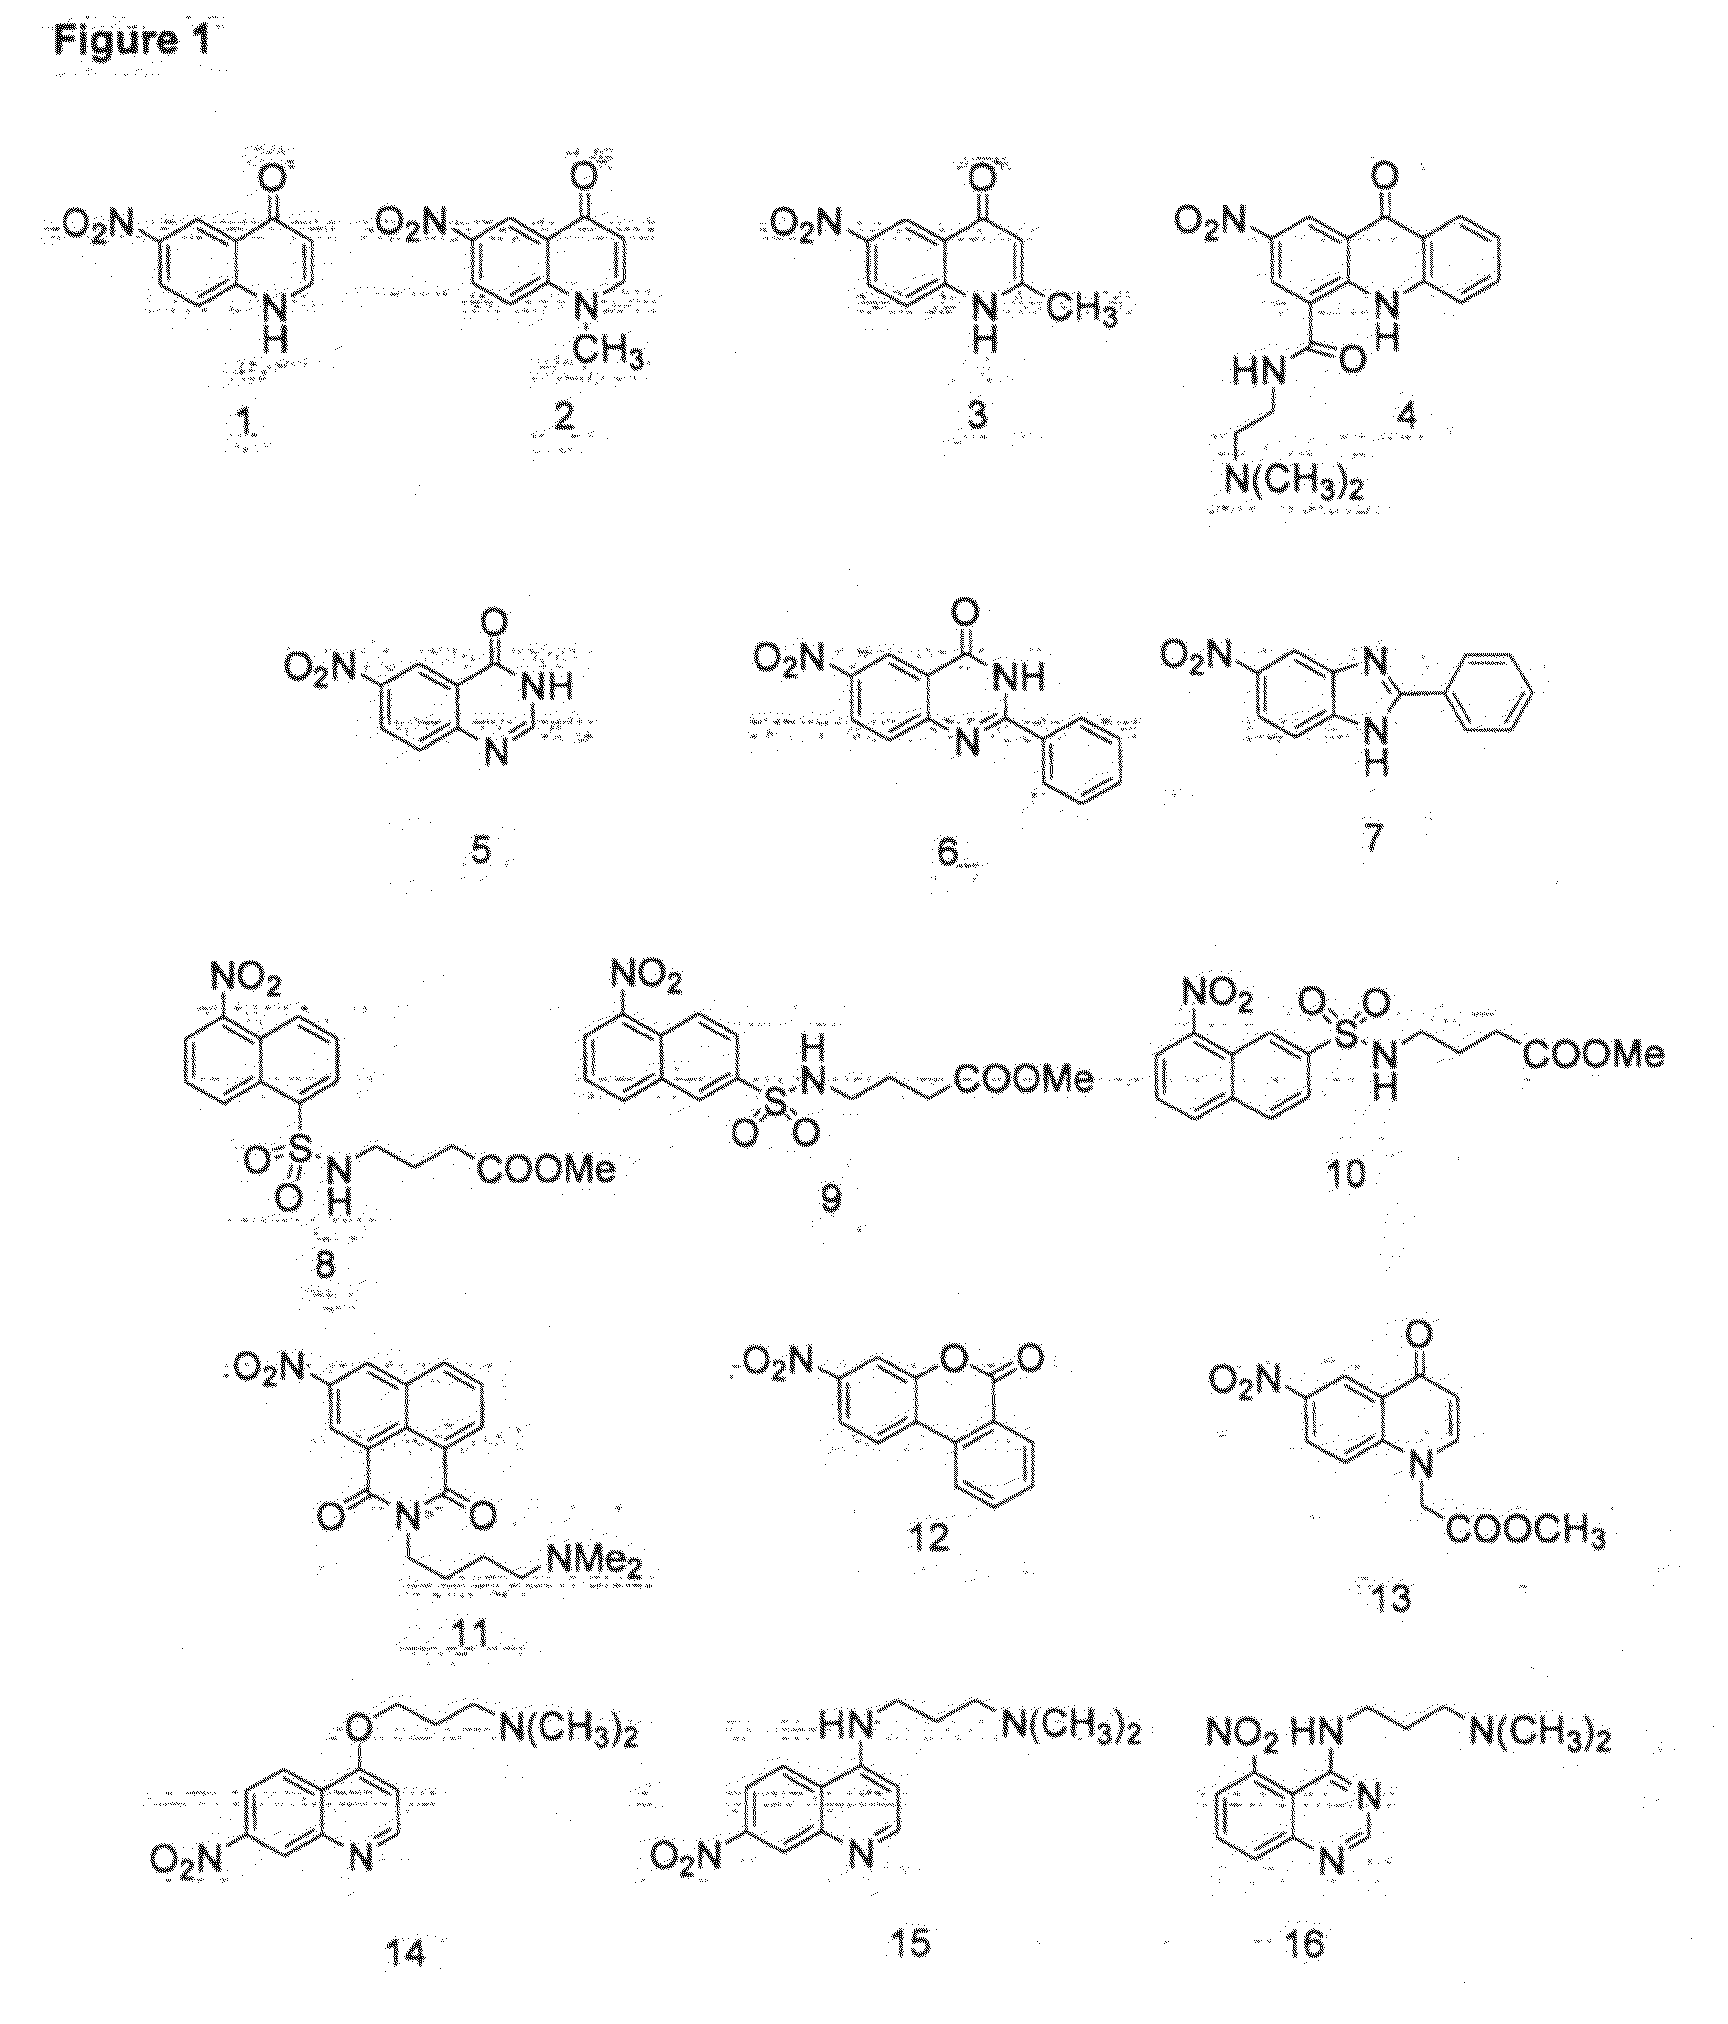 Method for the Fluorescent Detection of Nitroreductase Activity Using Nitro-Substituted Aromatic Compounds